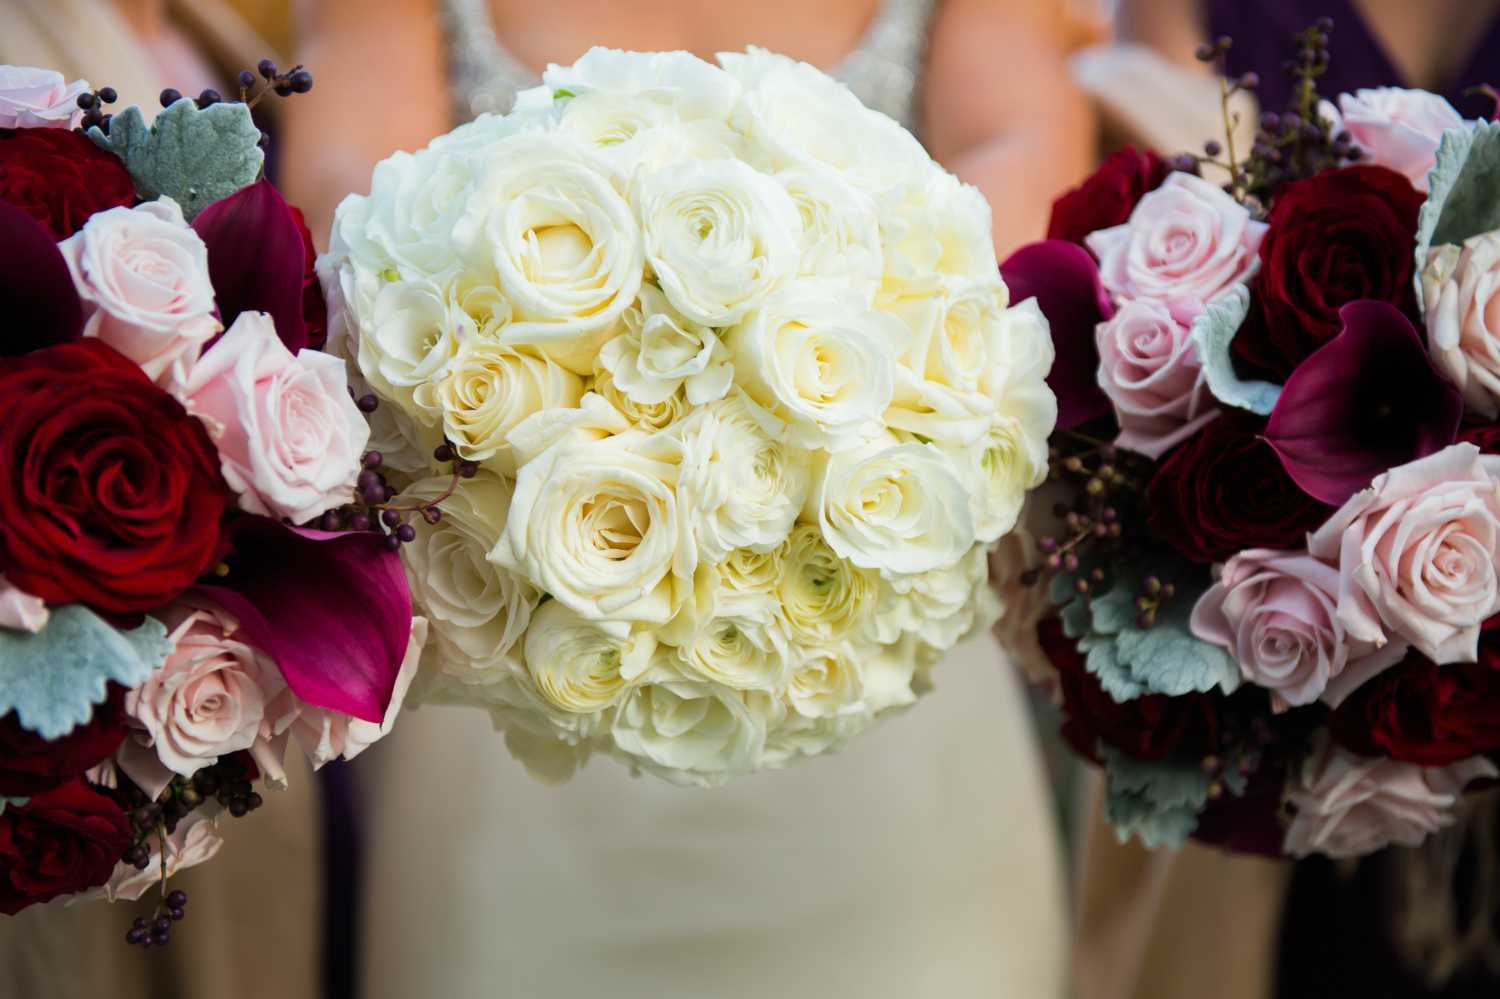 All white and cream bridal bouquet by Stapleton Floral Design